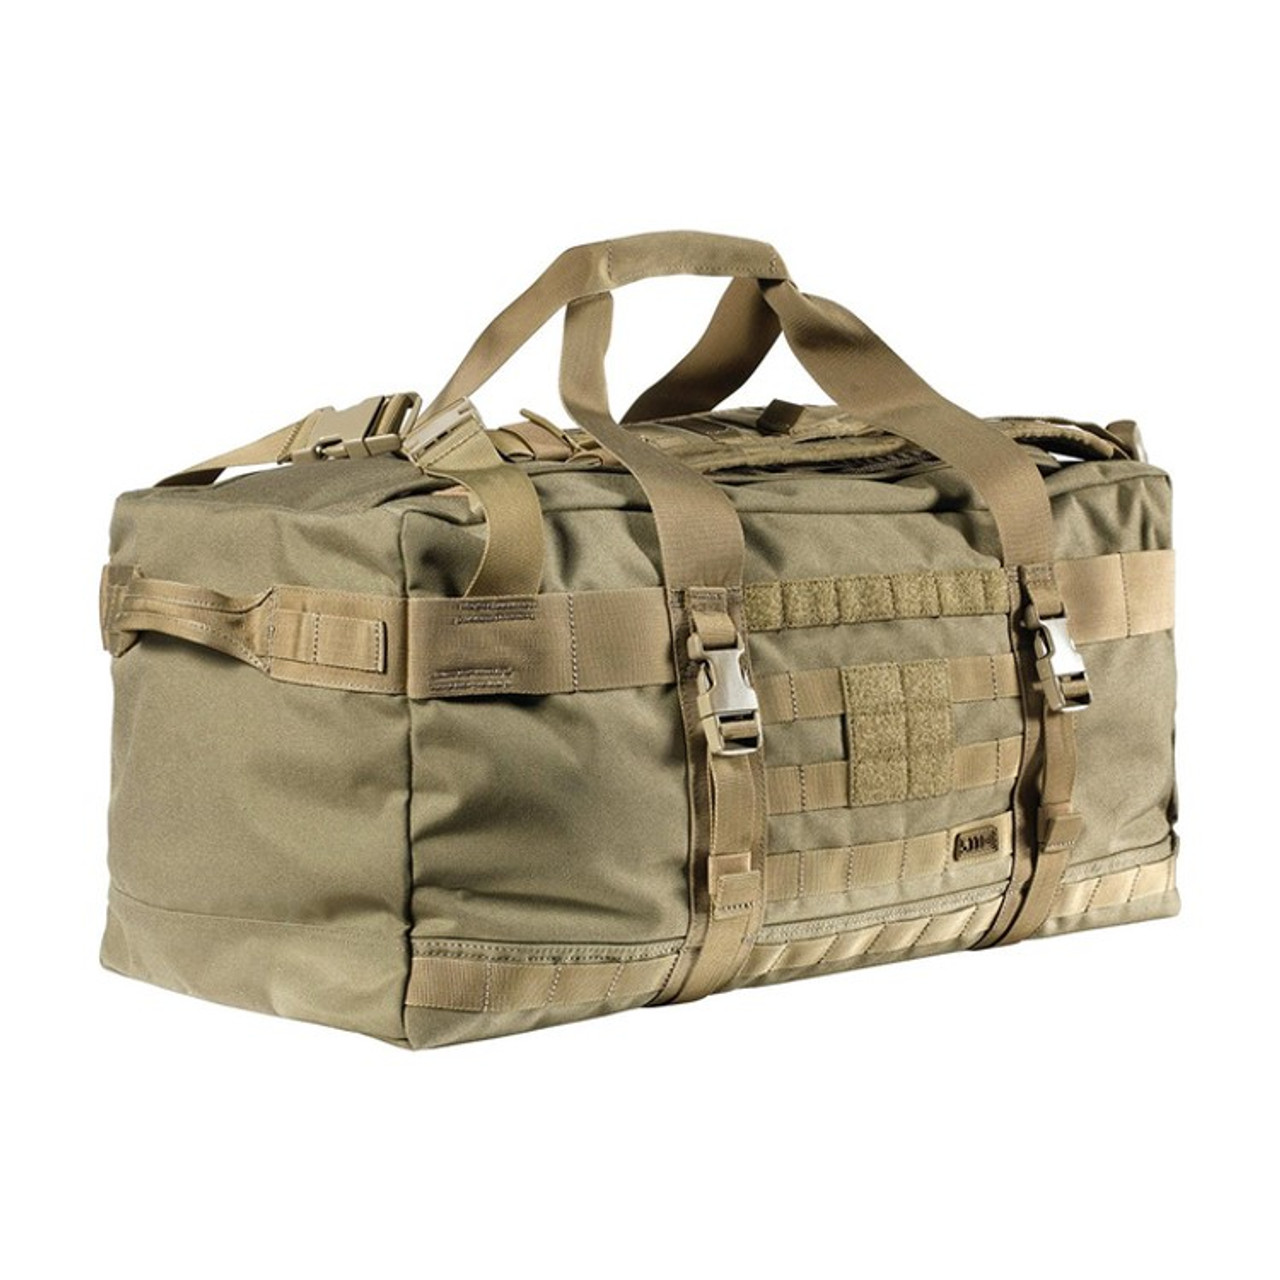 5.11 Tactical Rush LBD Duffle Bag (56294) in Sandstone color | For Sale